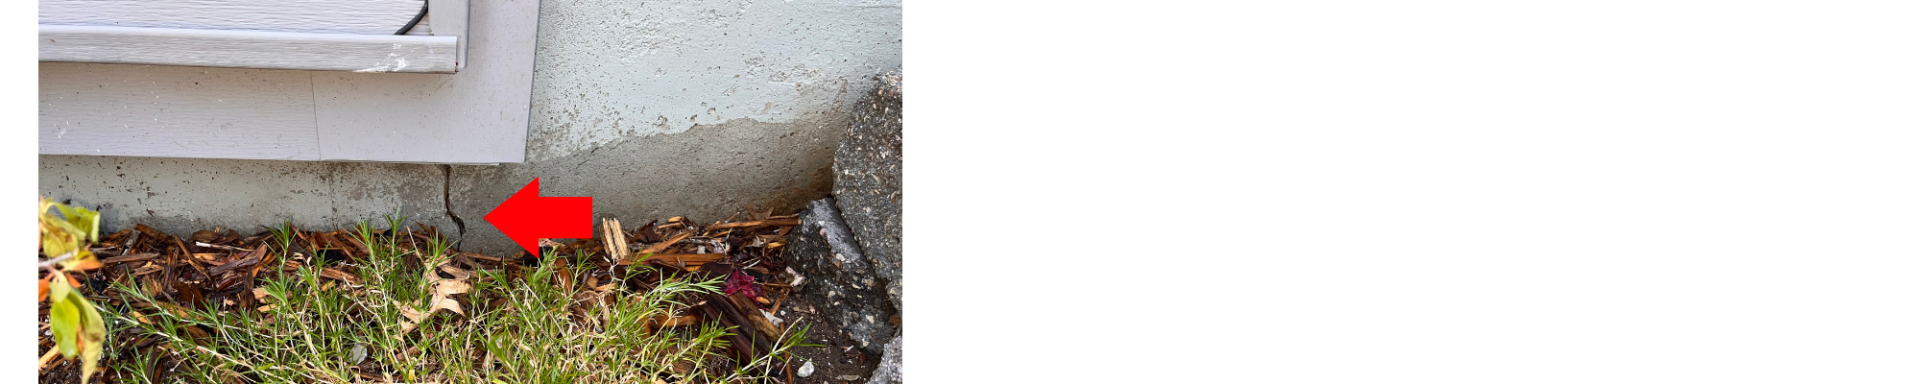 exterior foundation crack underneath a window, pointed at with a red arrow